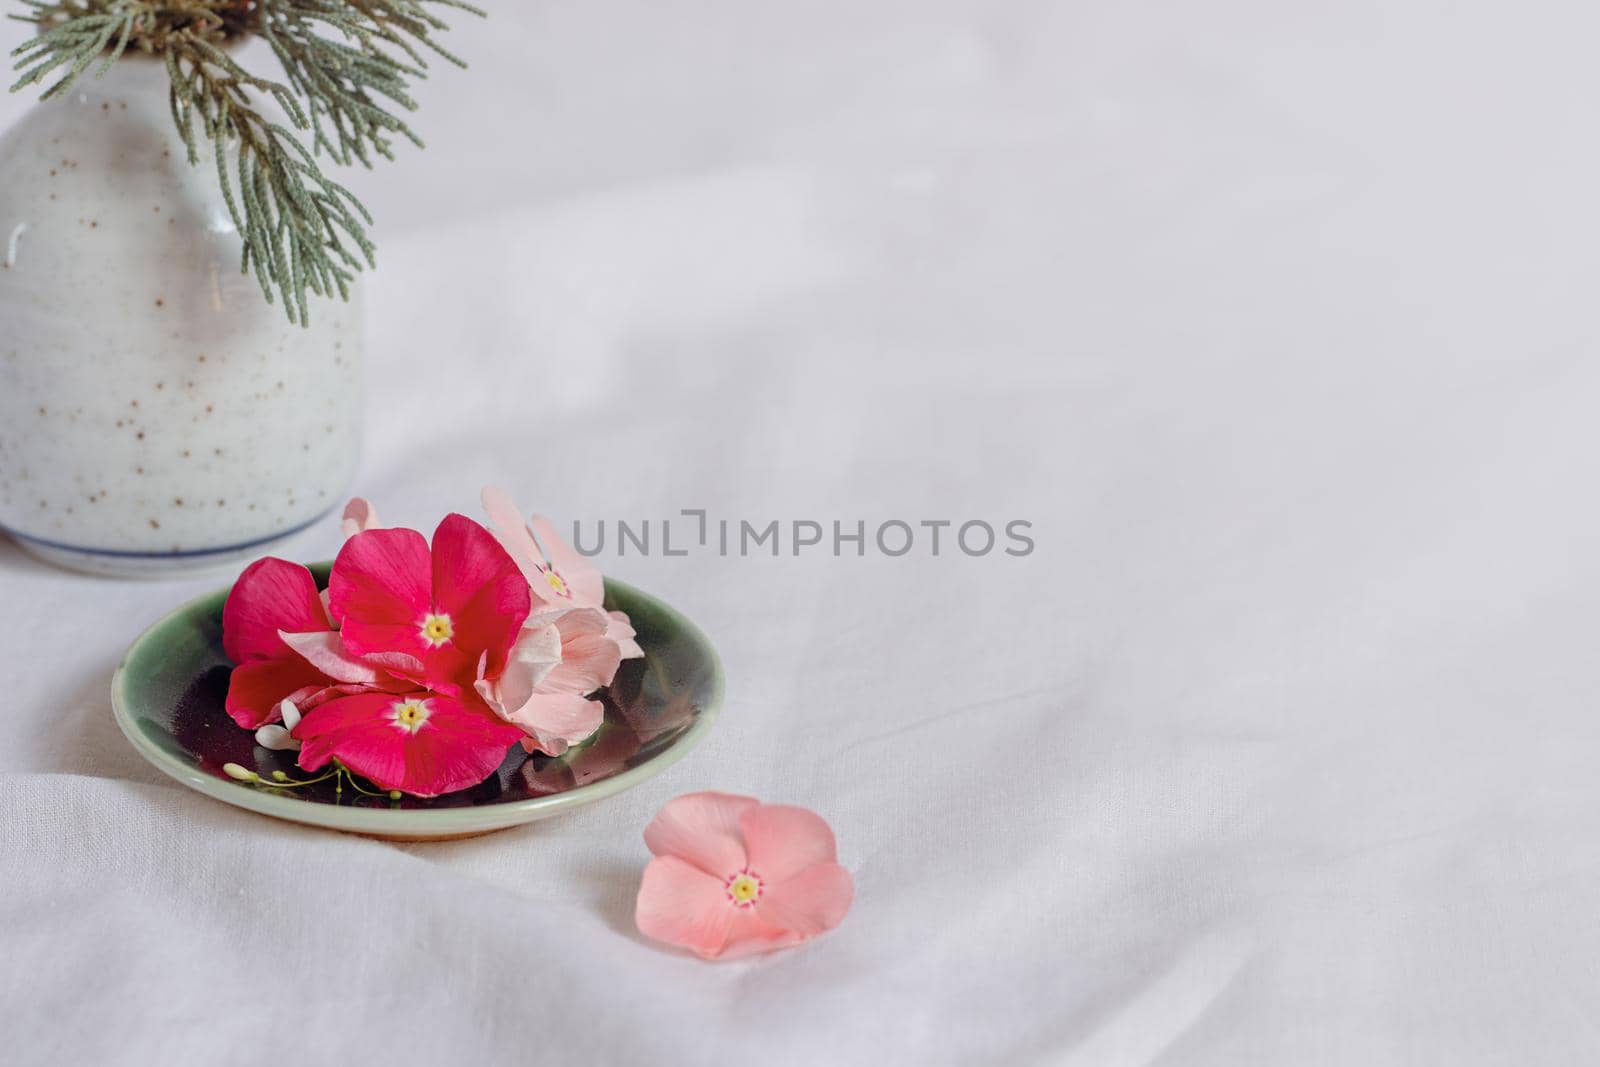 Composition of dainty periwinkle flowers in a bright white background by Sonnet15